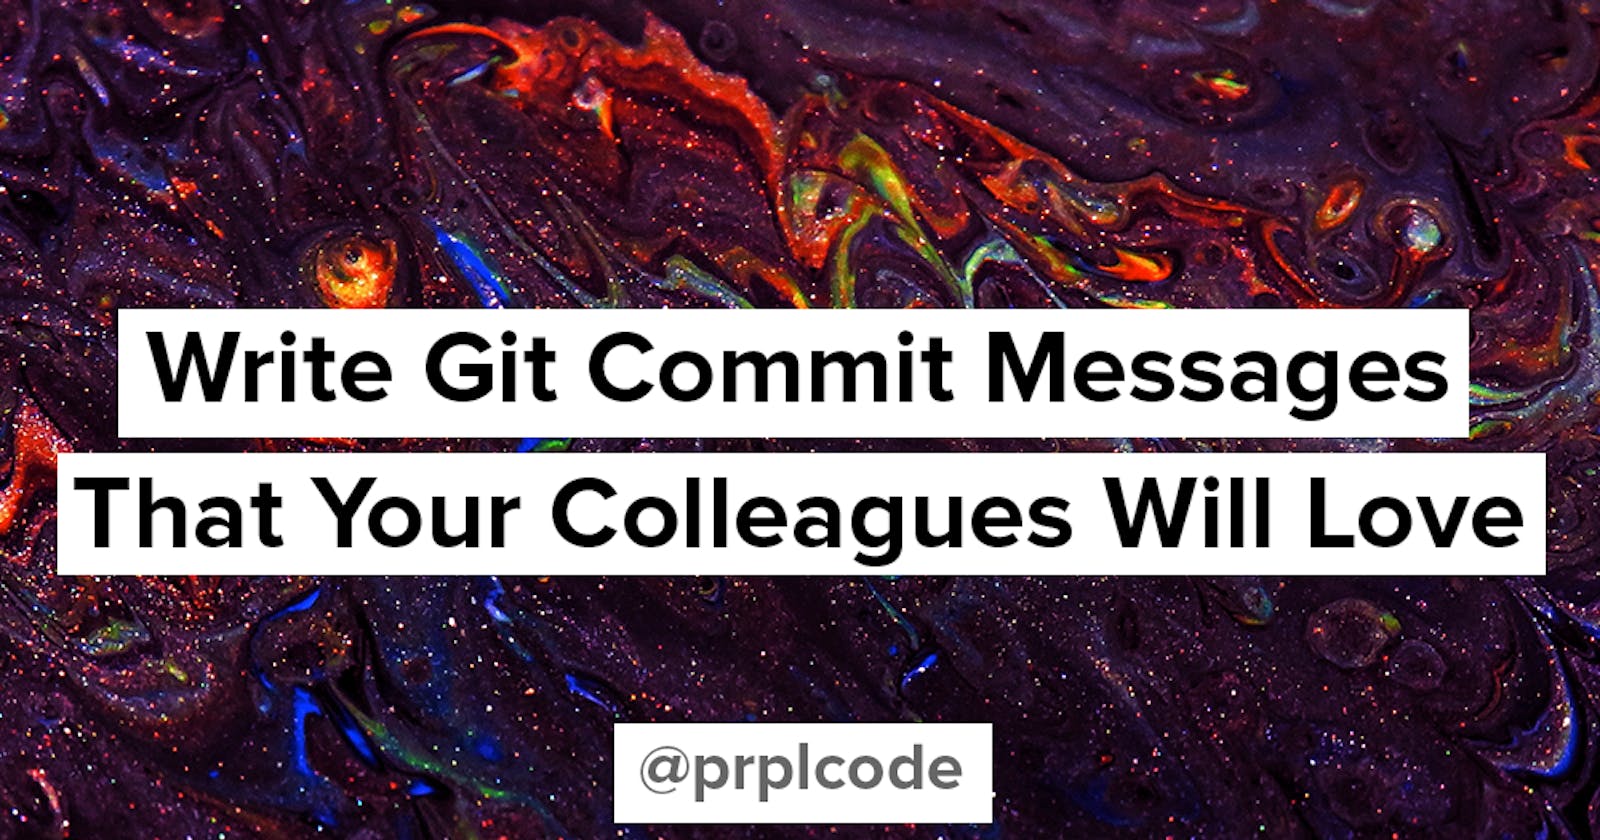 Write Git Commit Messages That Your Colleagues Will Love